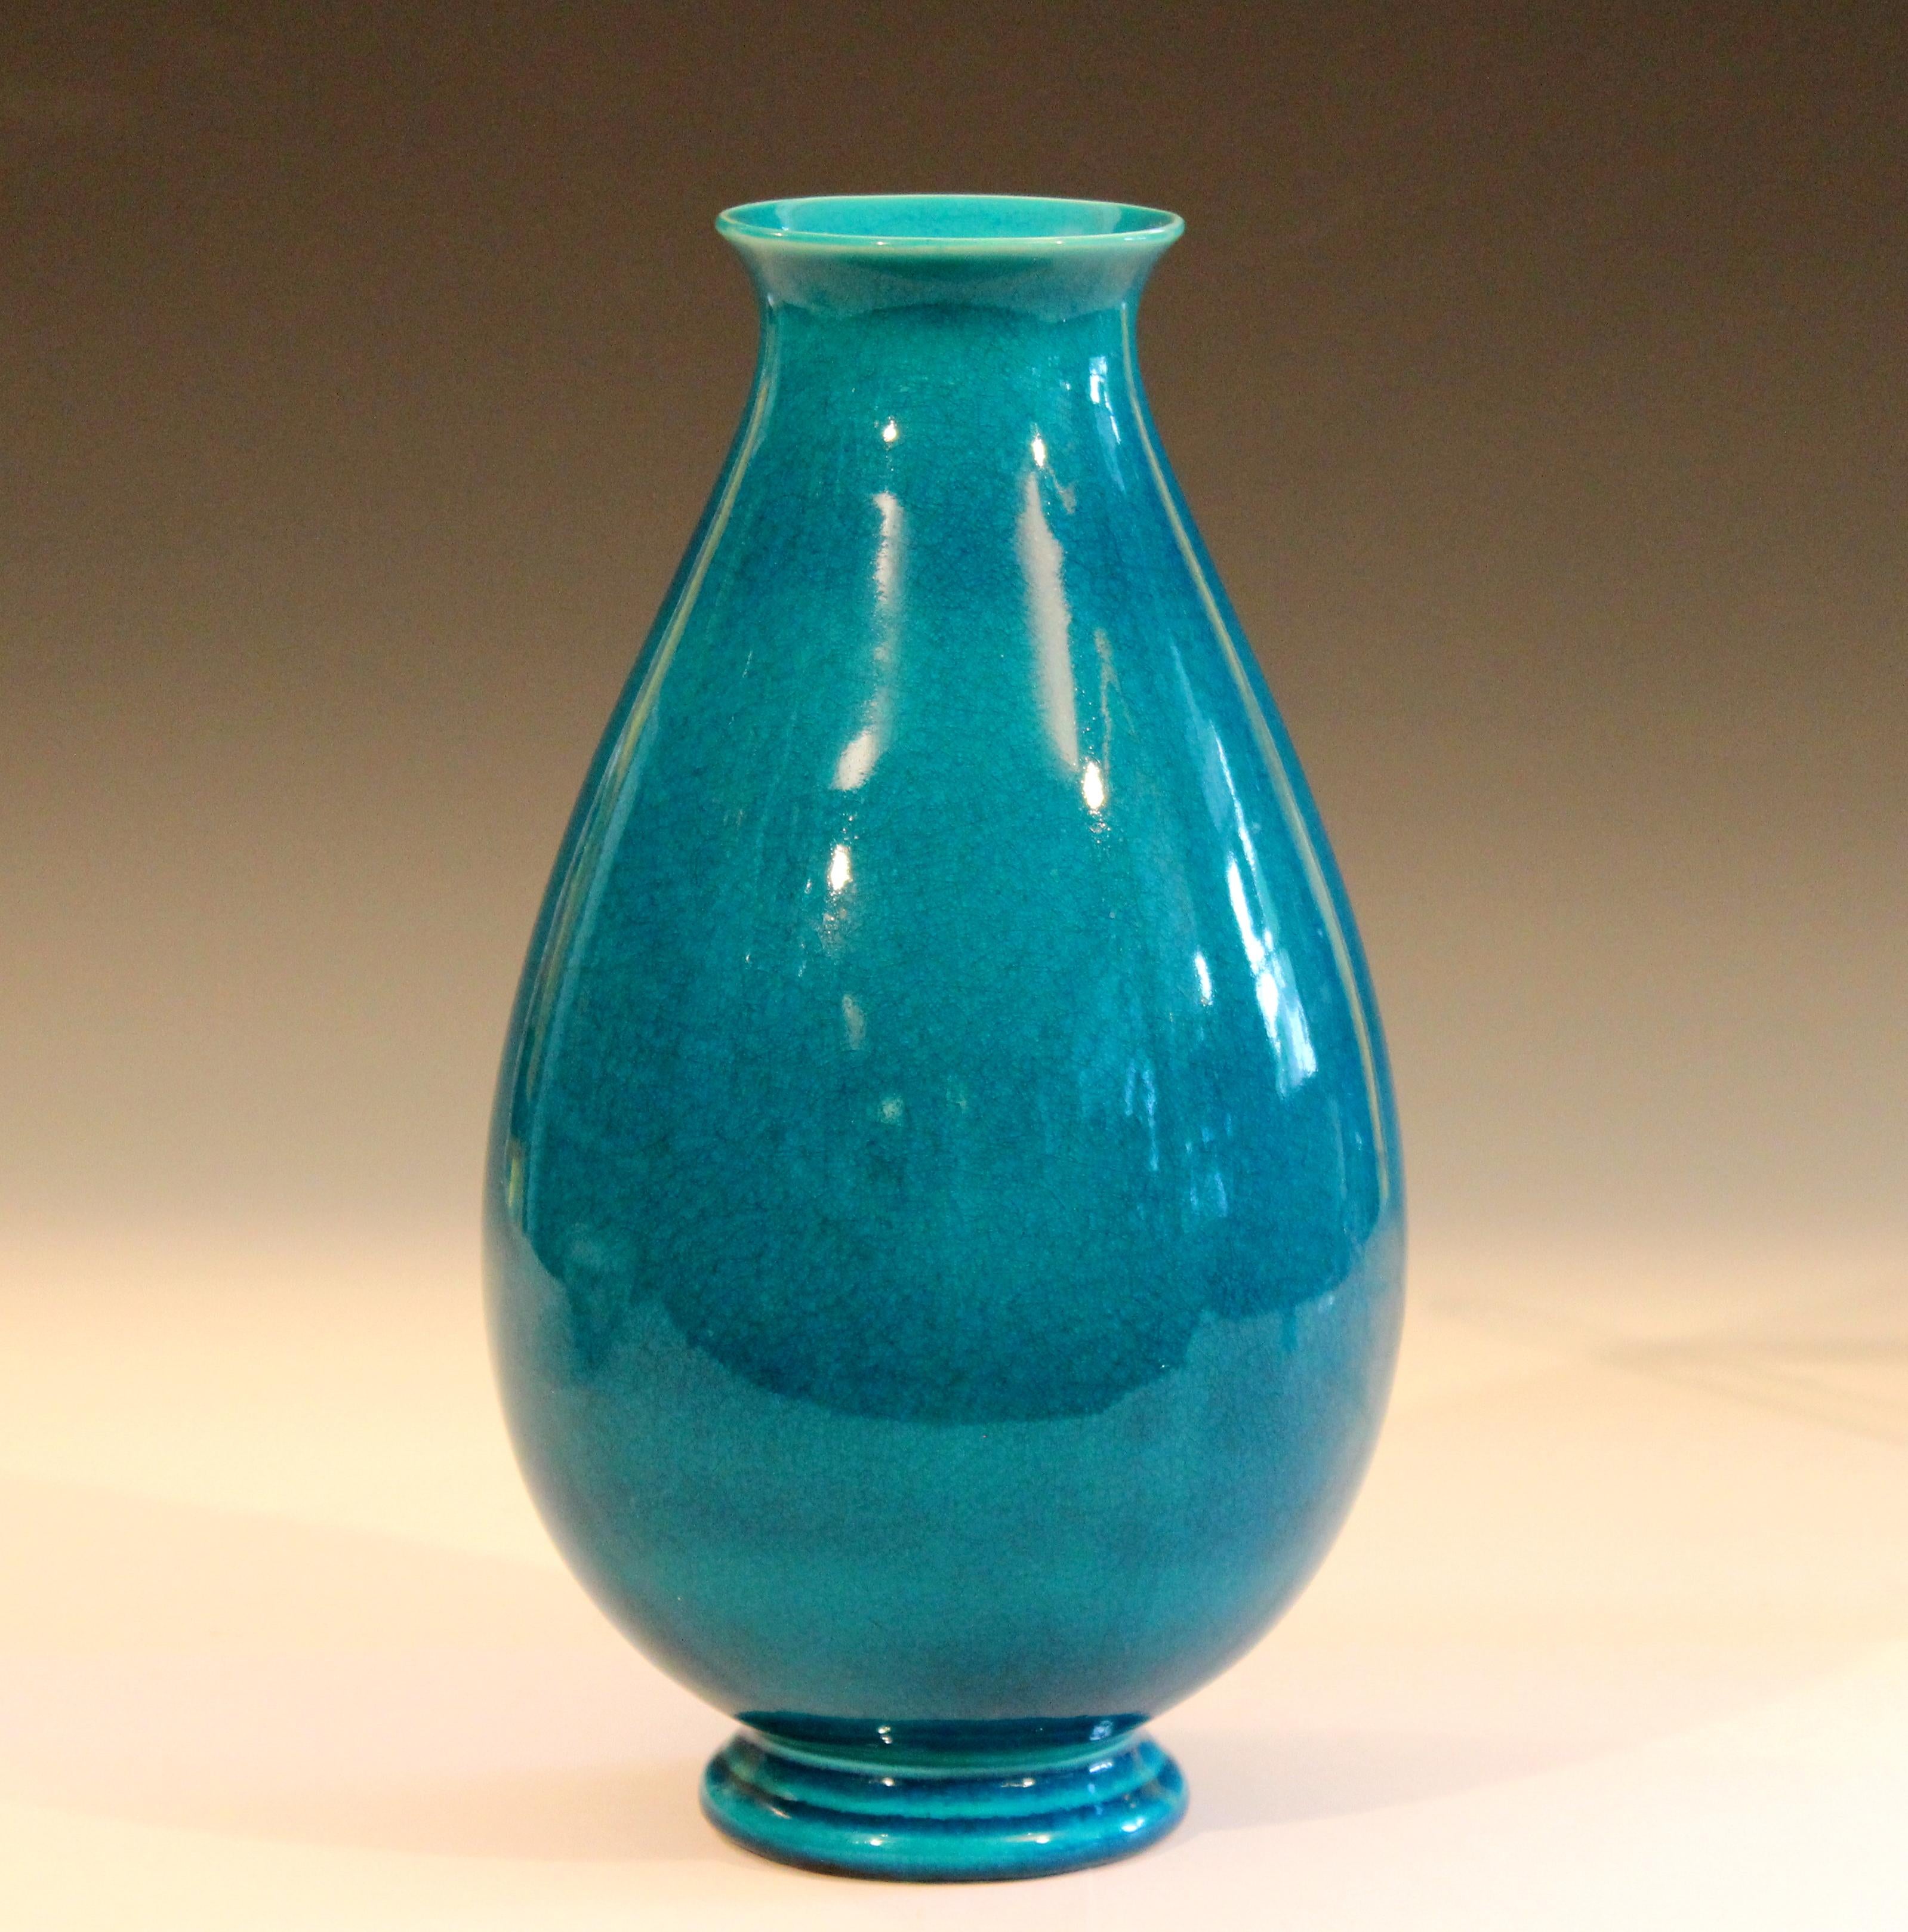 Vintage Robertson Hollywood pottery vase in sensuous and organic form with brilliant turquoise crackle glaze, circa early 20th century. Measures: 11 1/2